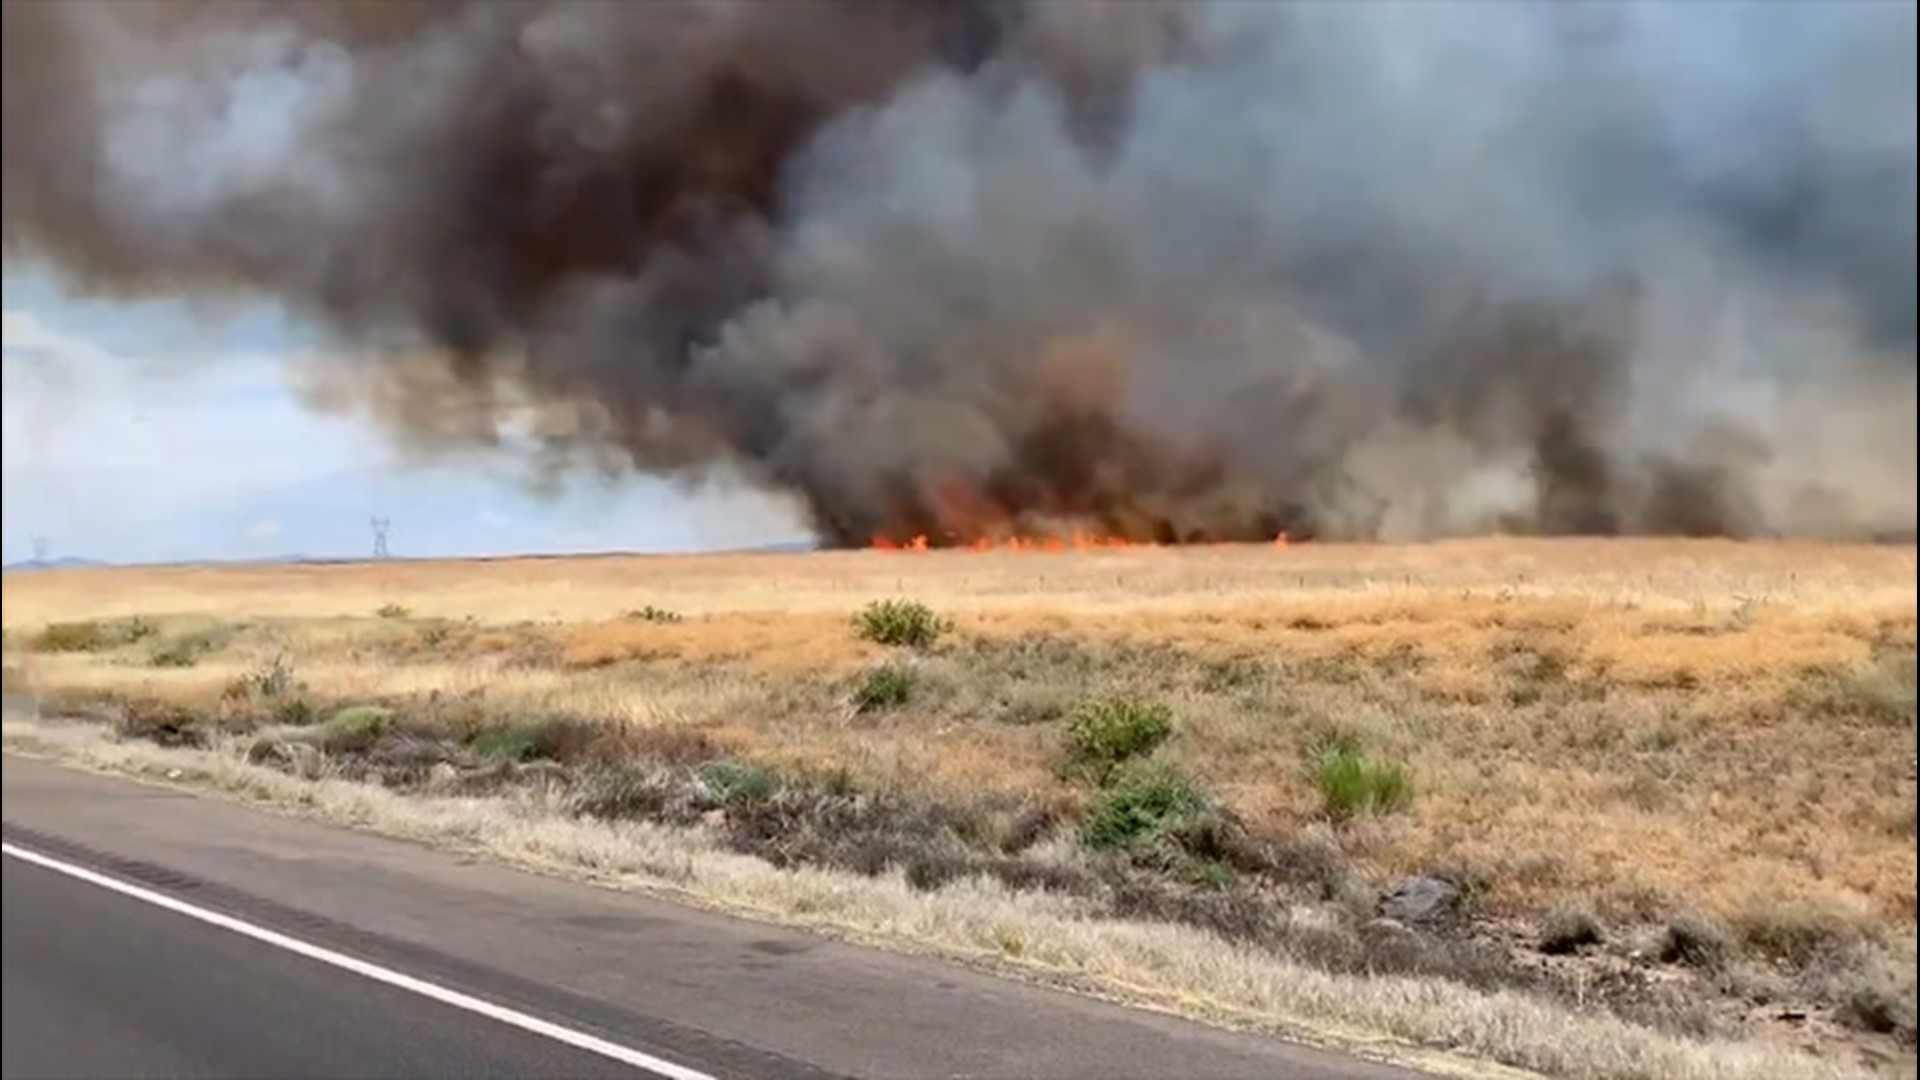 Sunday's fire behavior was described as 'fast-moving' as a dry, gusty wind grew the Sunset Fire to 4,000 acres in Yavapai County, Arizona, on May 31.